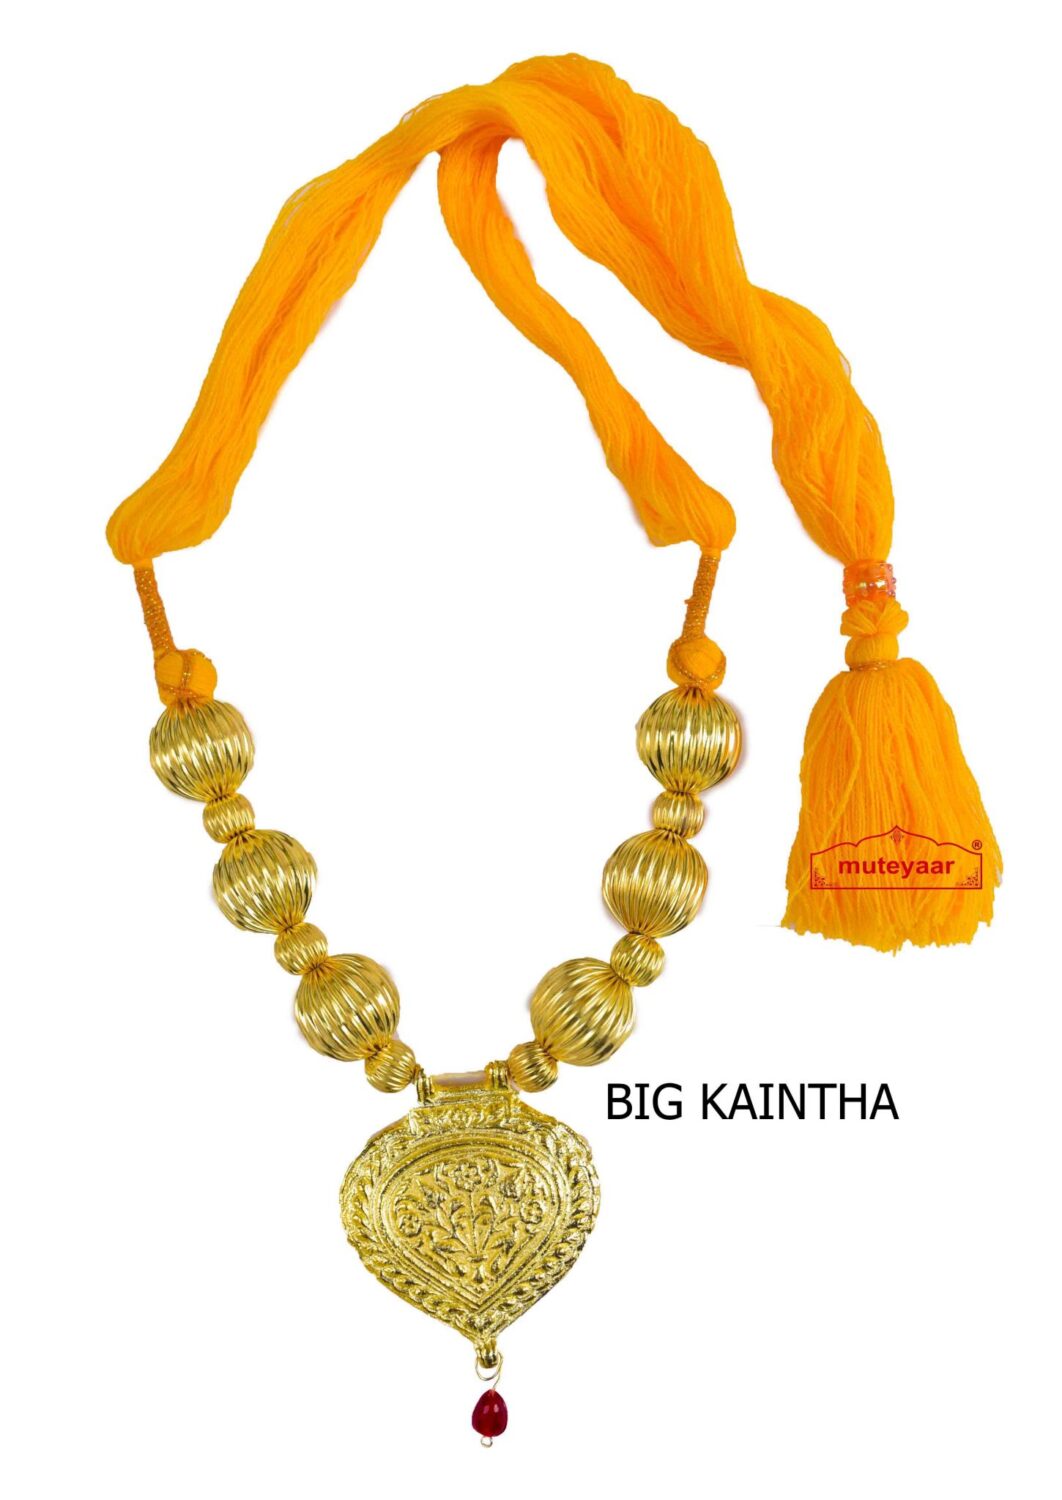 Golden Kaintha Necklace for Bhangra Giddha | Costume Jewelry – big